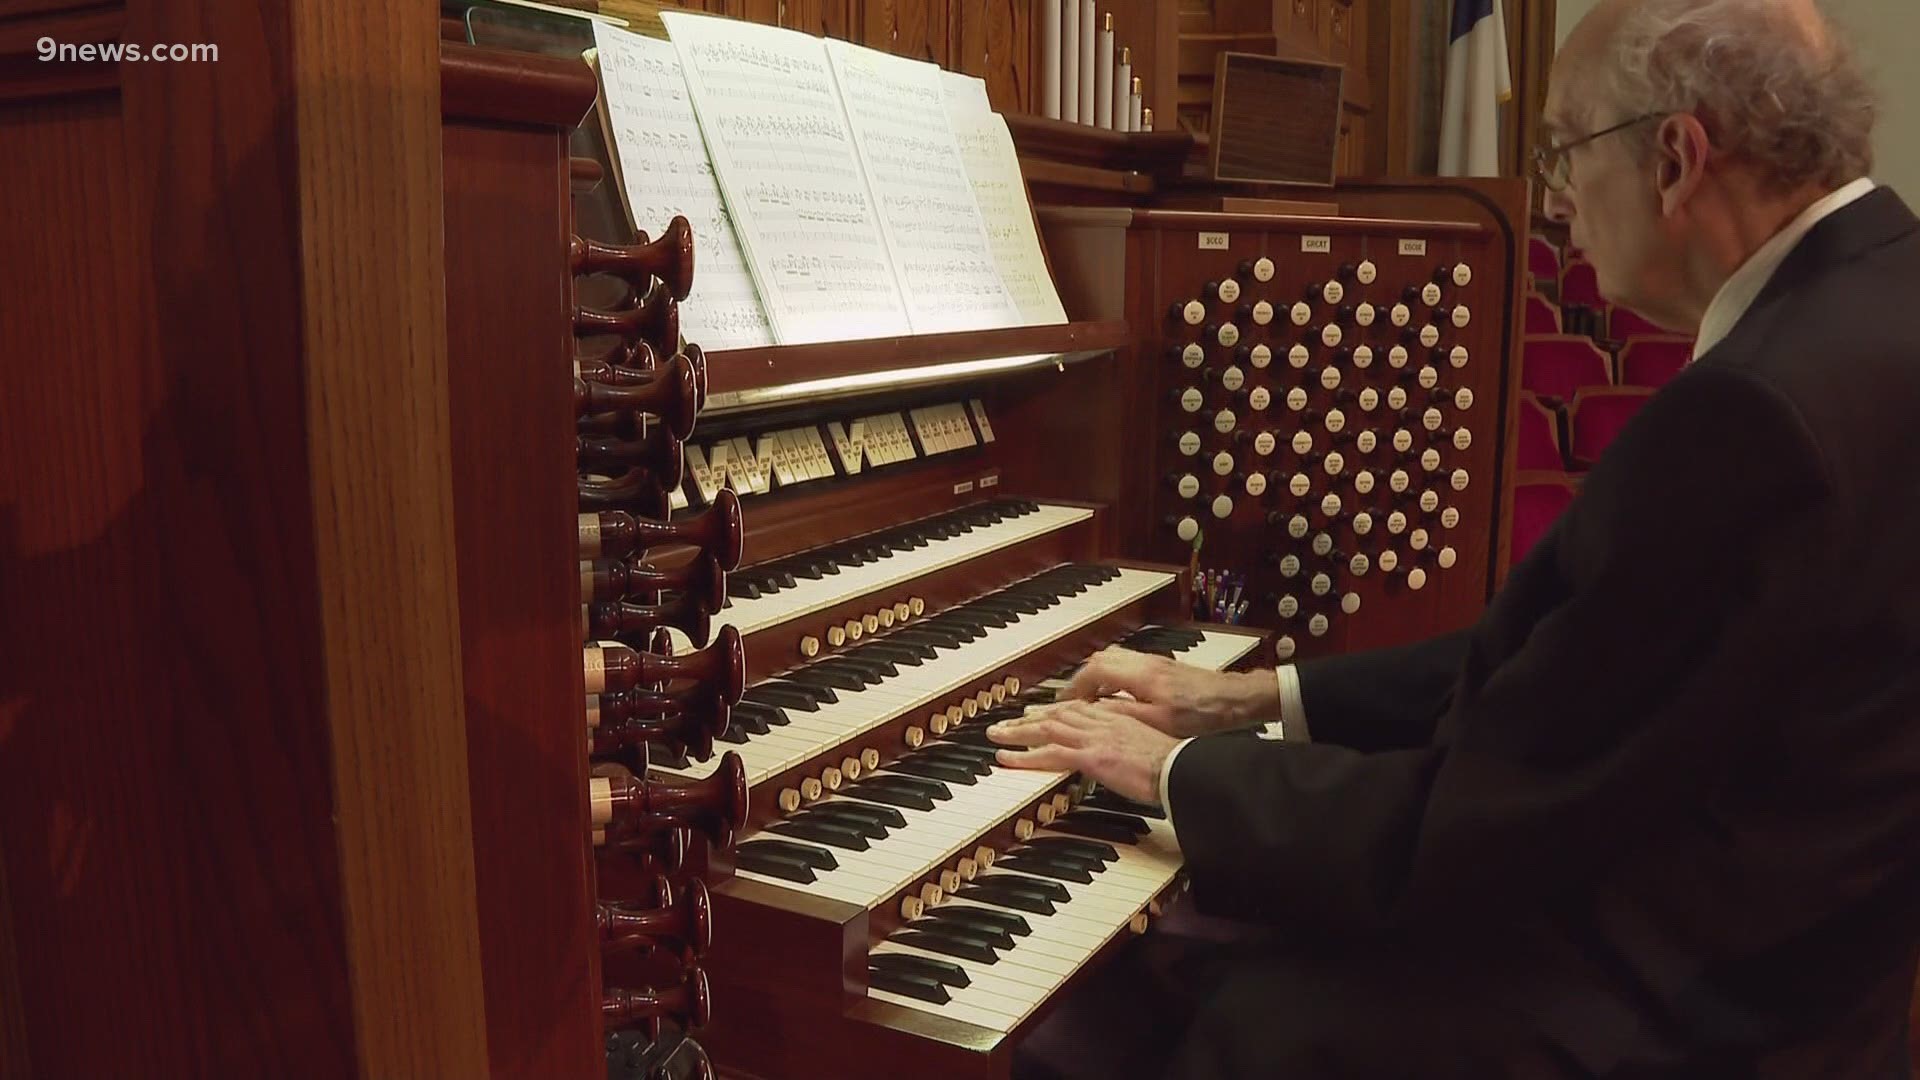 On 18th and broadway imagine sounds from a 161-year-old church.